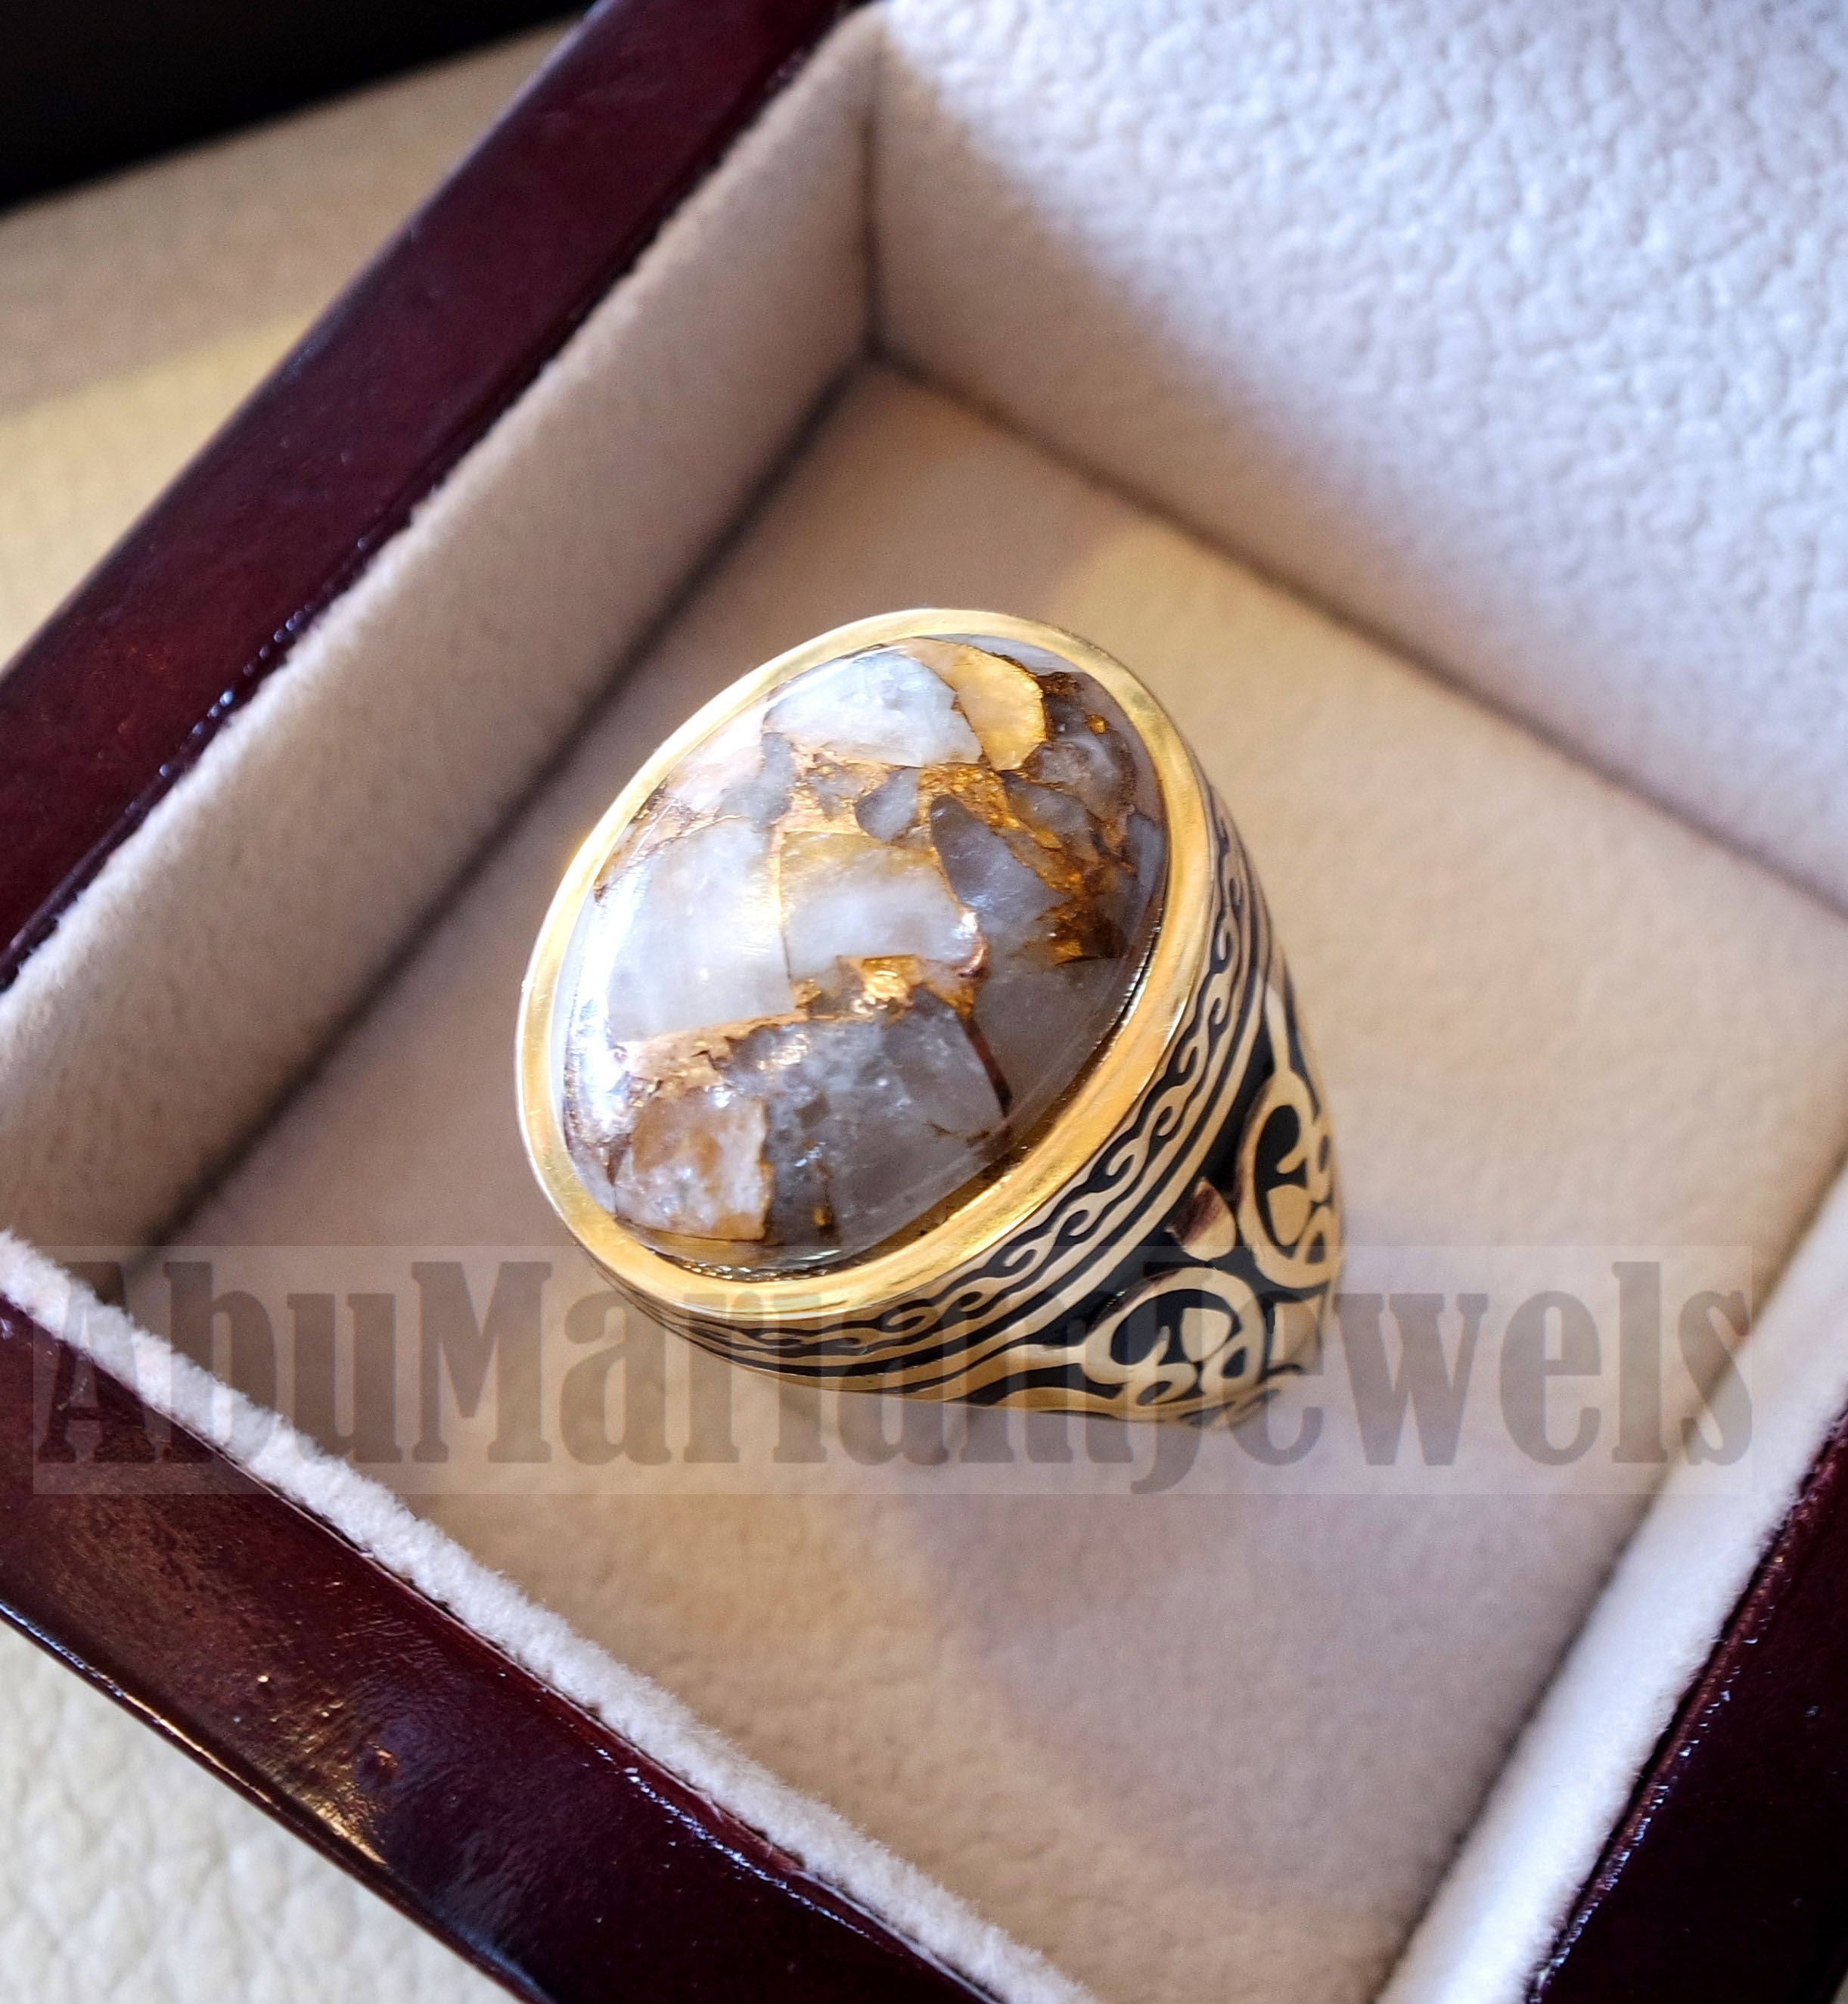 18k yellow gold men ring copper calcite cabochon high quality natural stone all sizes Ottoman signet style fine jewelry fast shipping